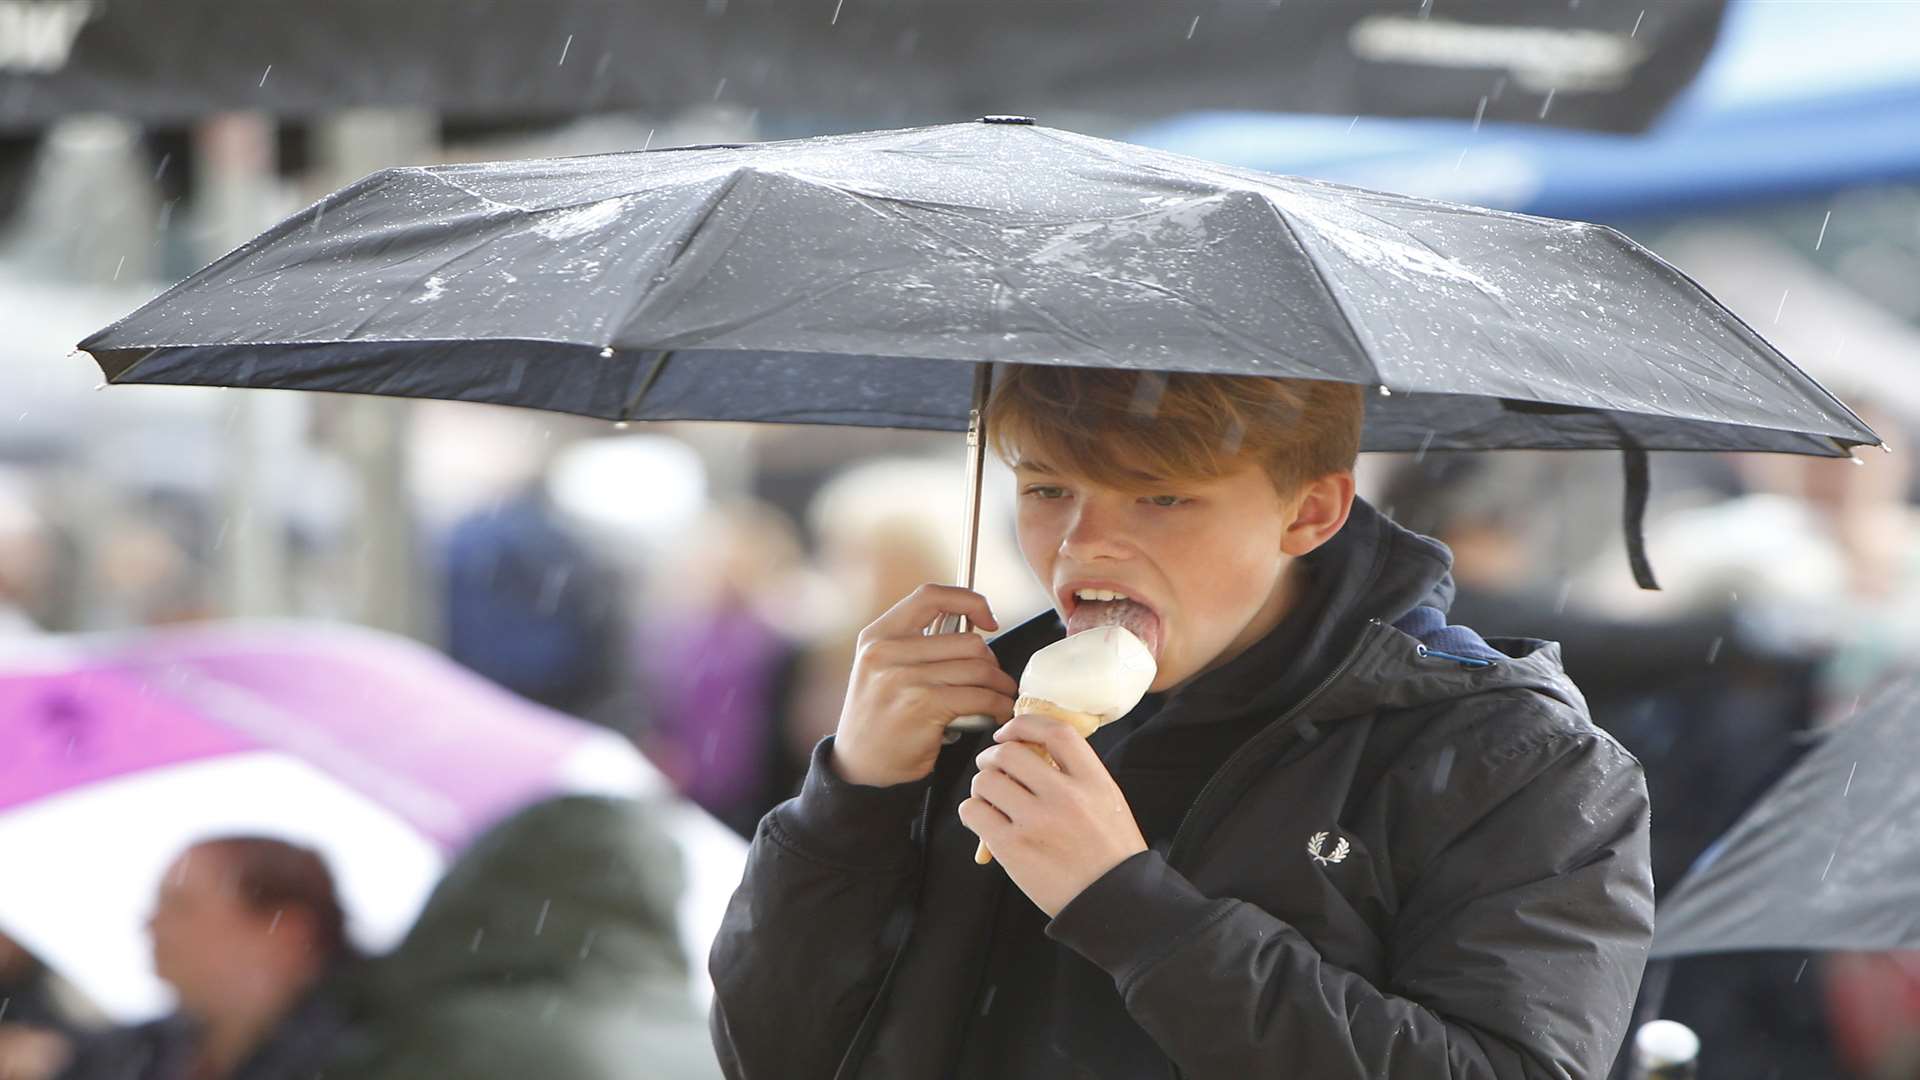 Heavy rain cast a pall on proceedings for some visitors to the Big Day Out festival in Maidstone